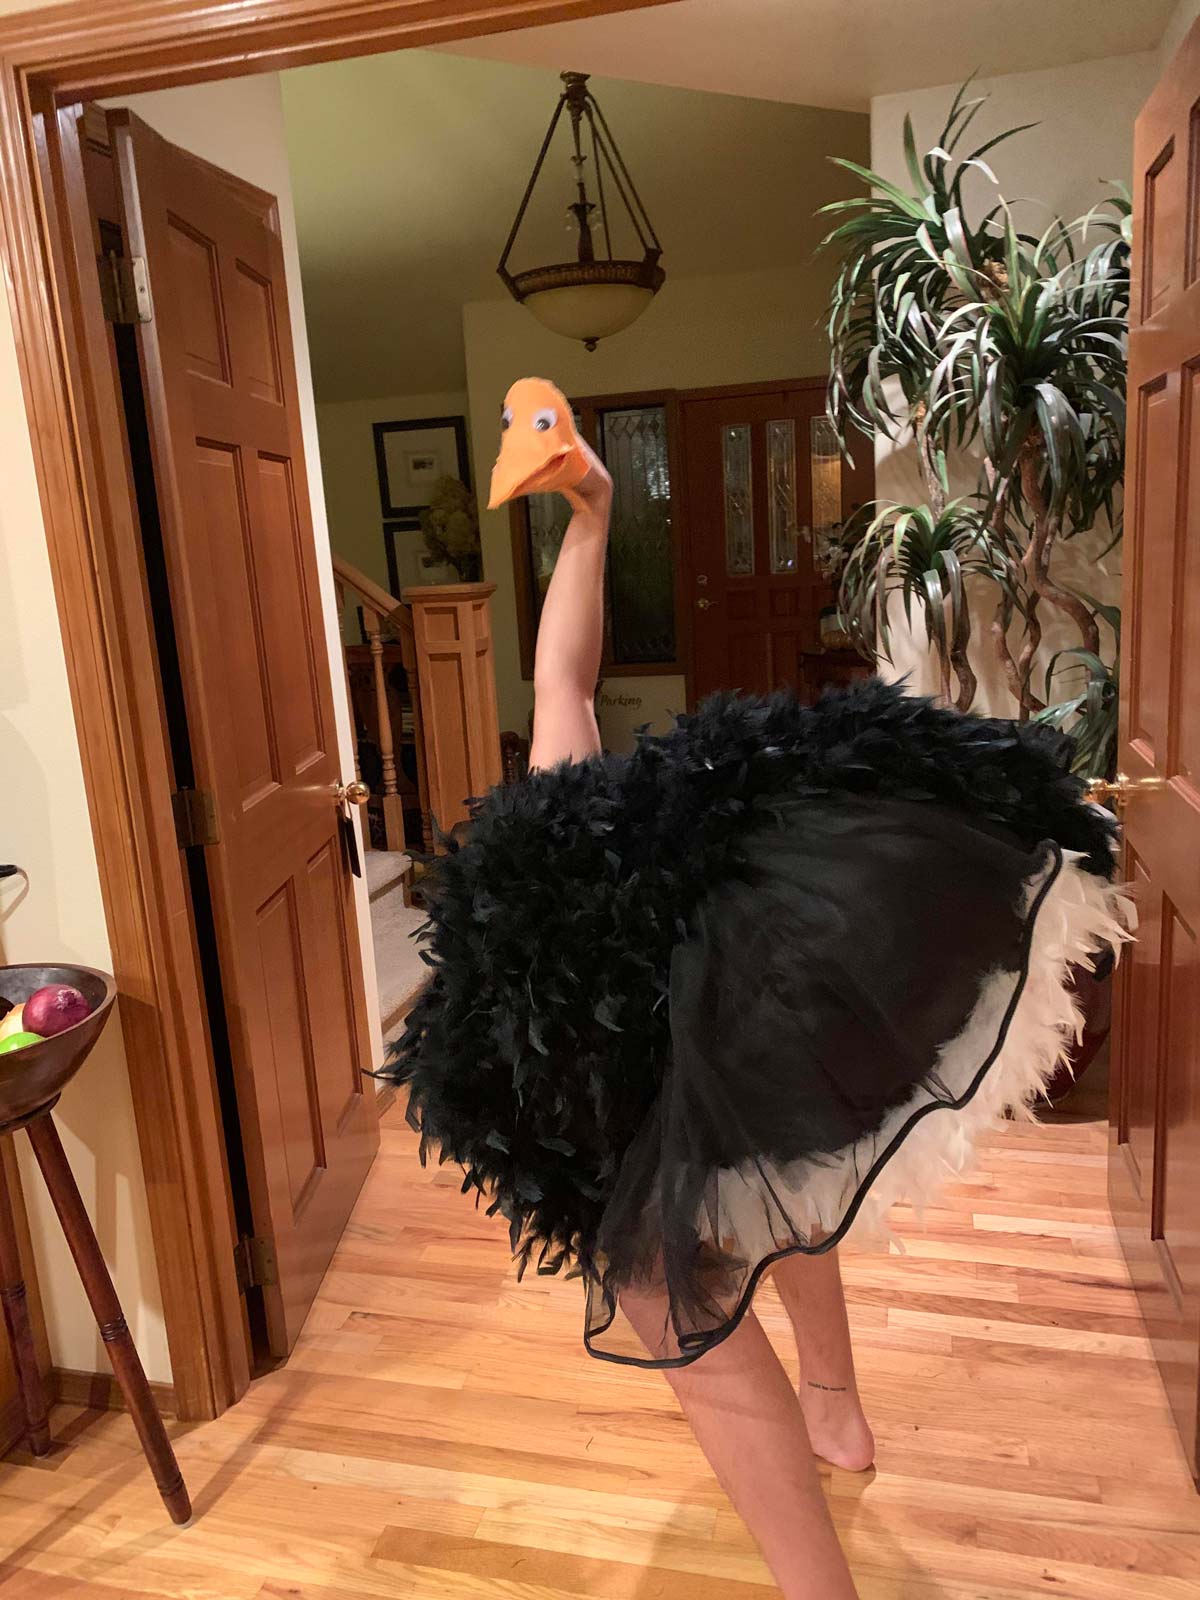 My ostrich costume from last year